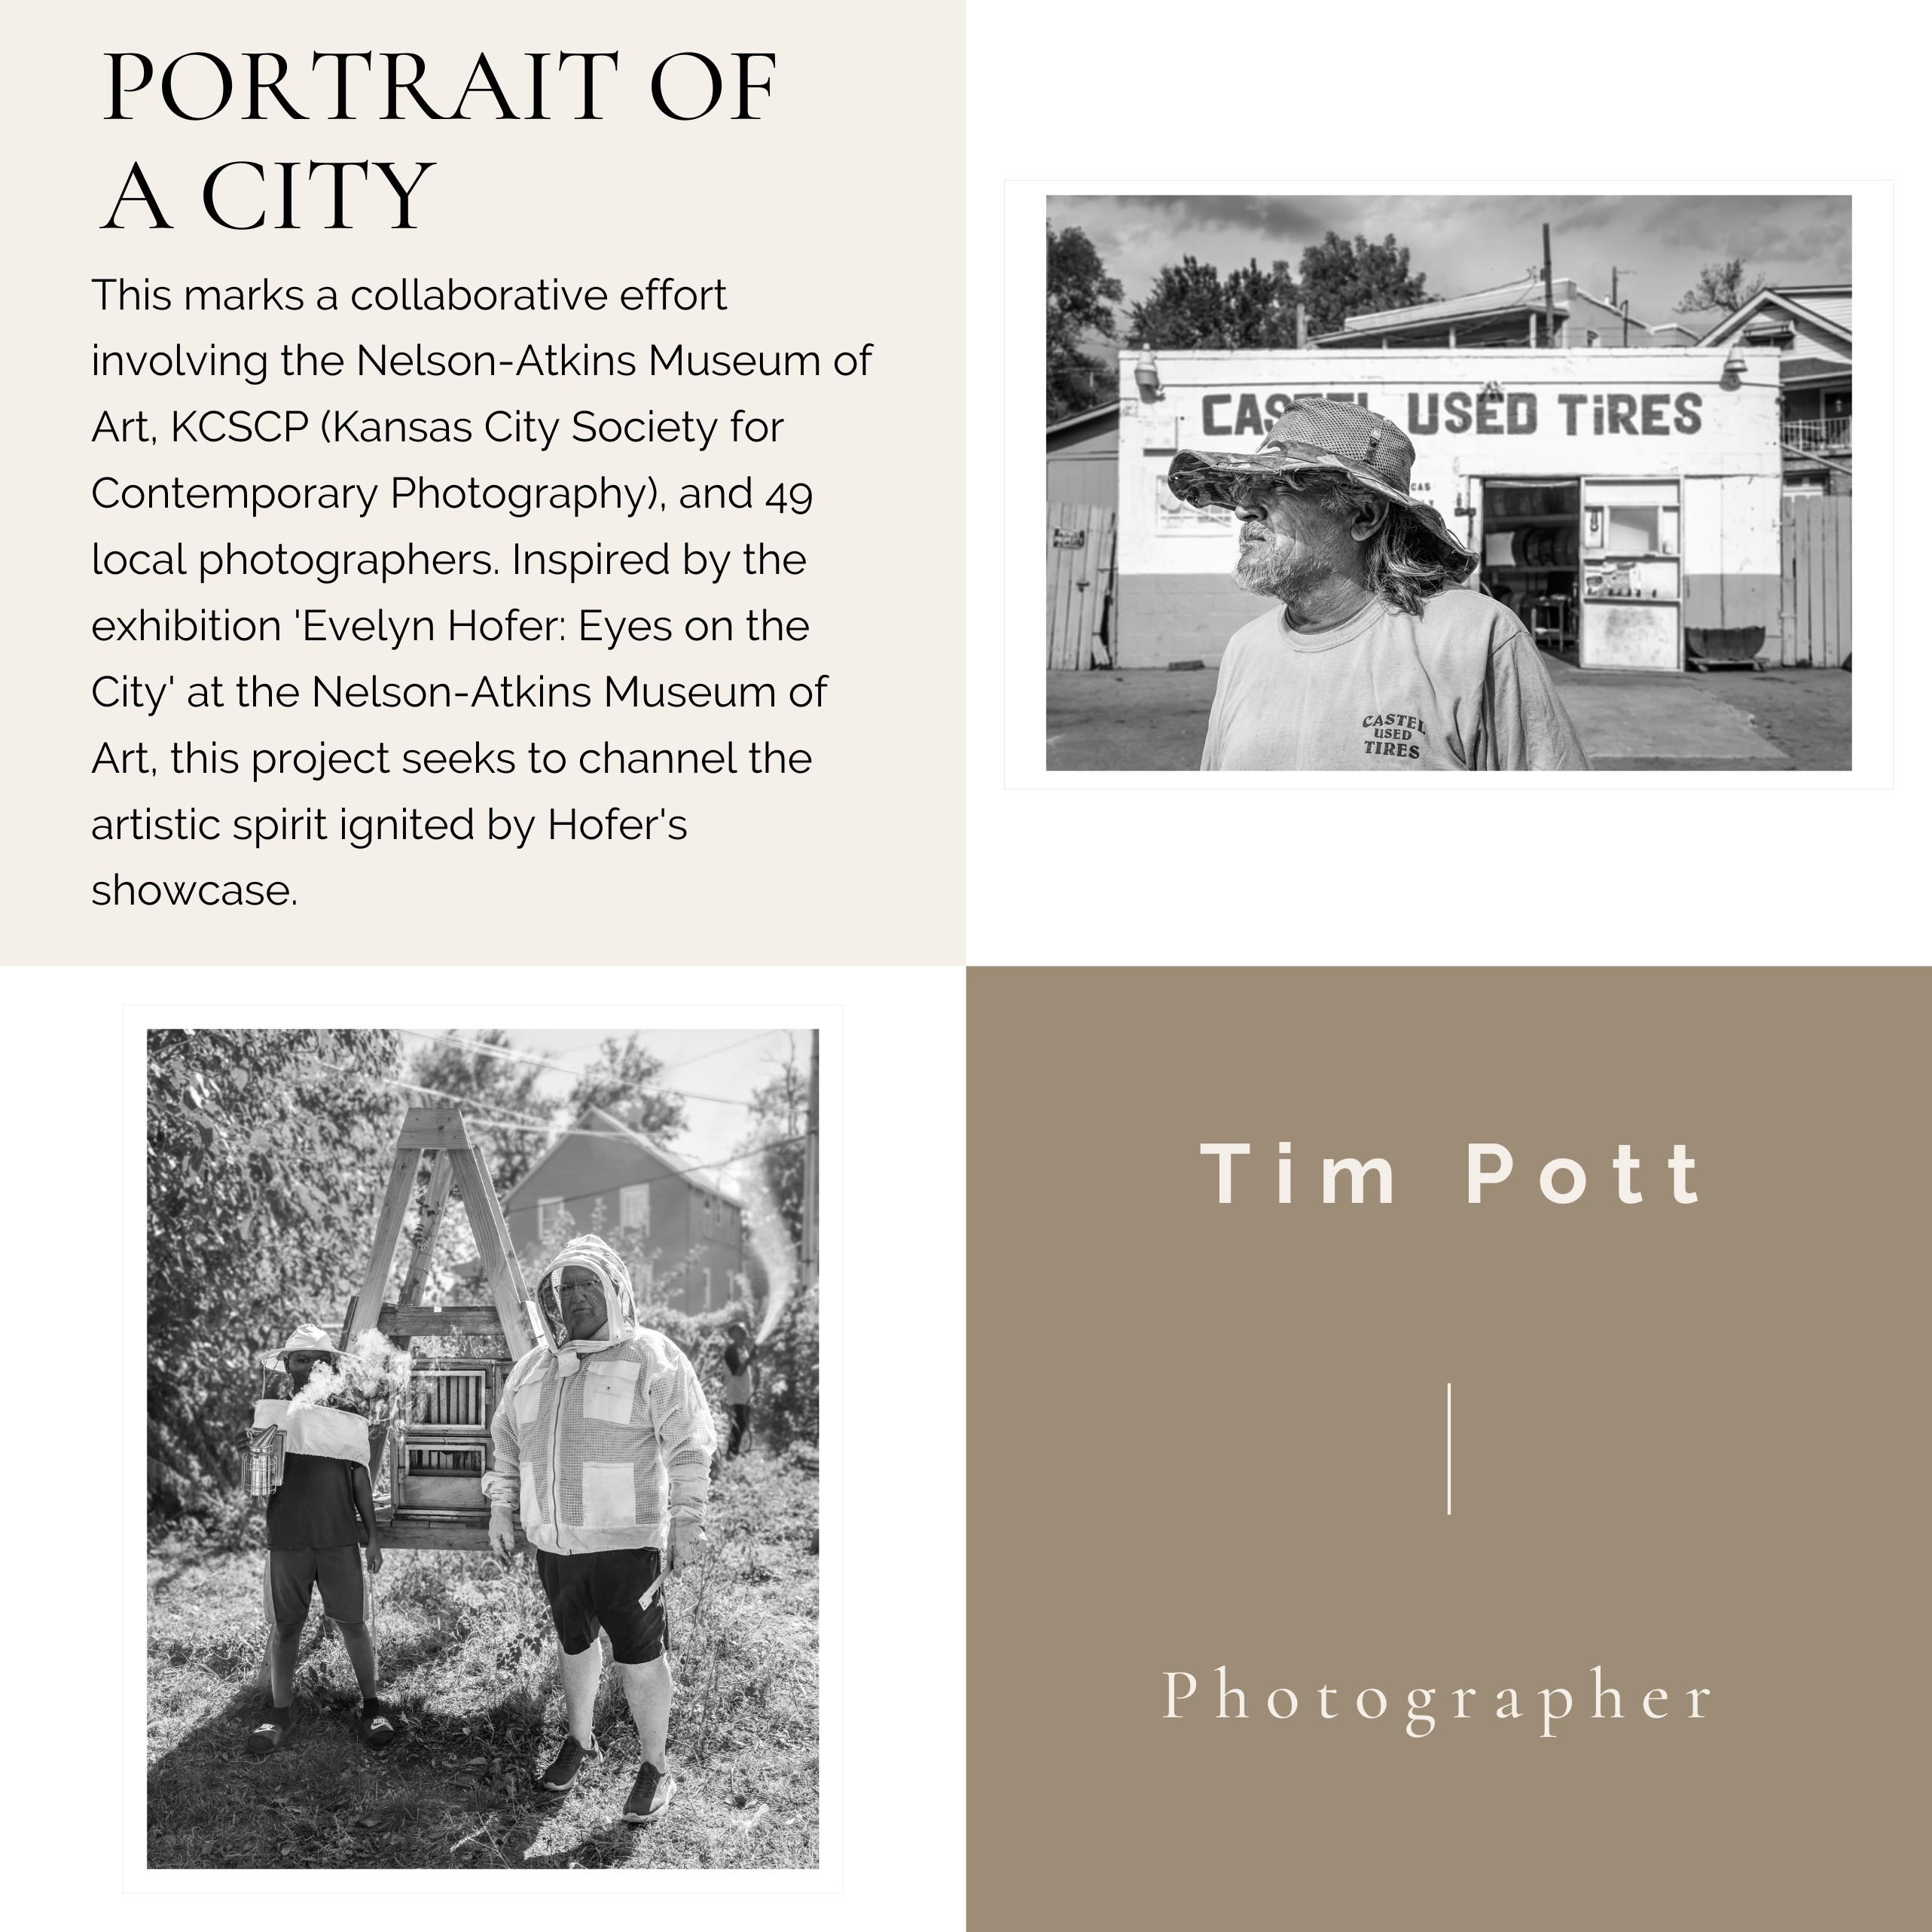 Tim Pott
Peter’s Neighborhood
Year: 2024
Archival Pigment Print on
Hahnemuehle Baryta Rag
Framed Size: 13 x 13 x 0.25 inches
COA provided

*Ready to hang; matted and framed in a minimal black frame made from composite wood with standard plex

From